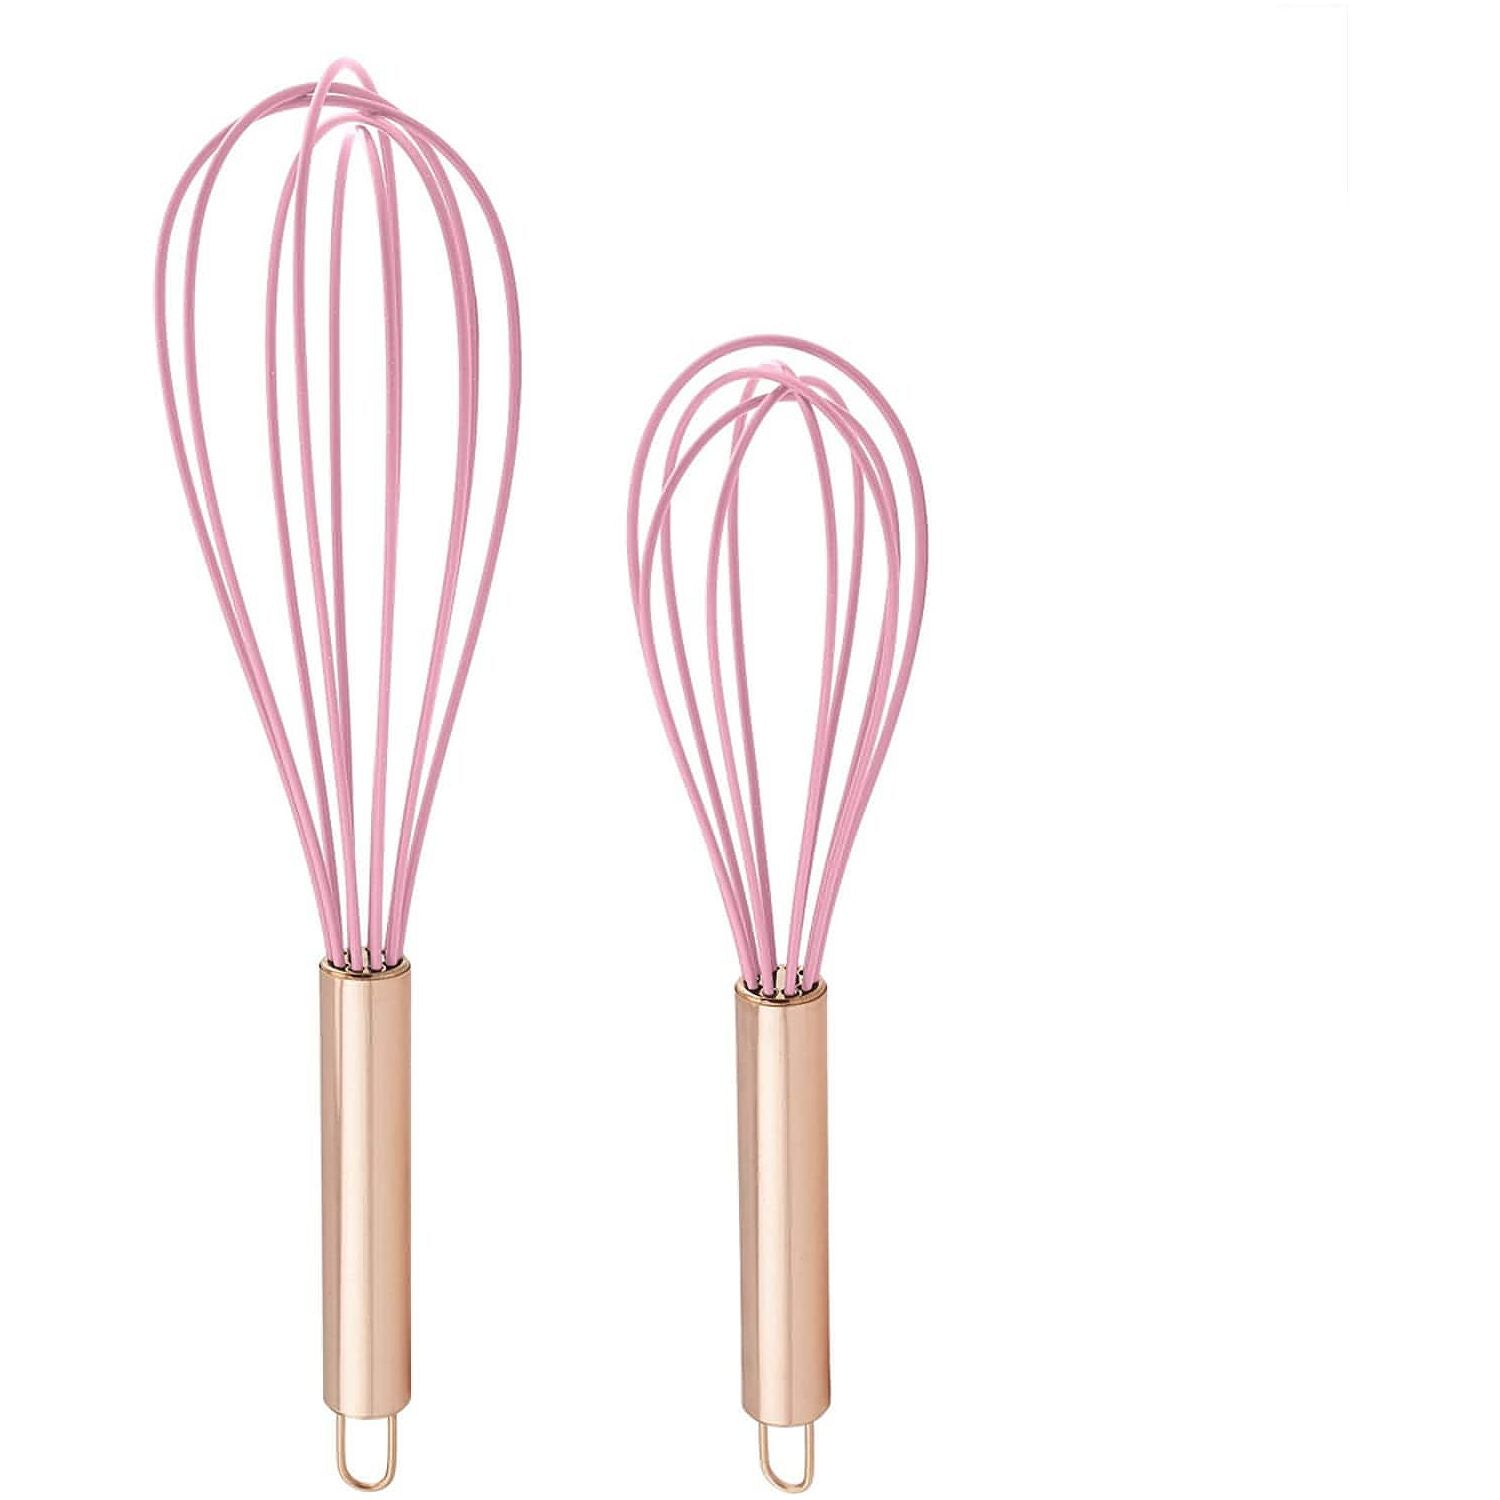 Cook Works 9" and 12" Silicone Non-Scratch Whisks Wood Handles, Heat resistant - Brandat Outlet